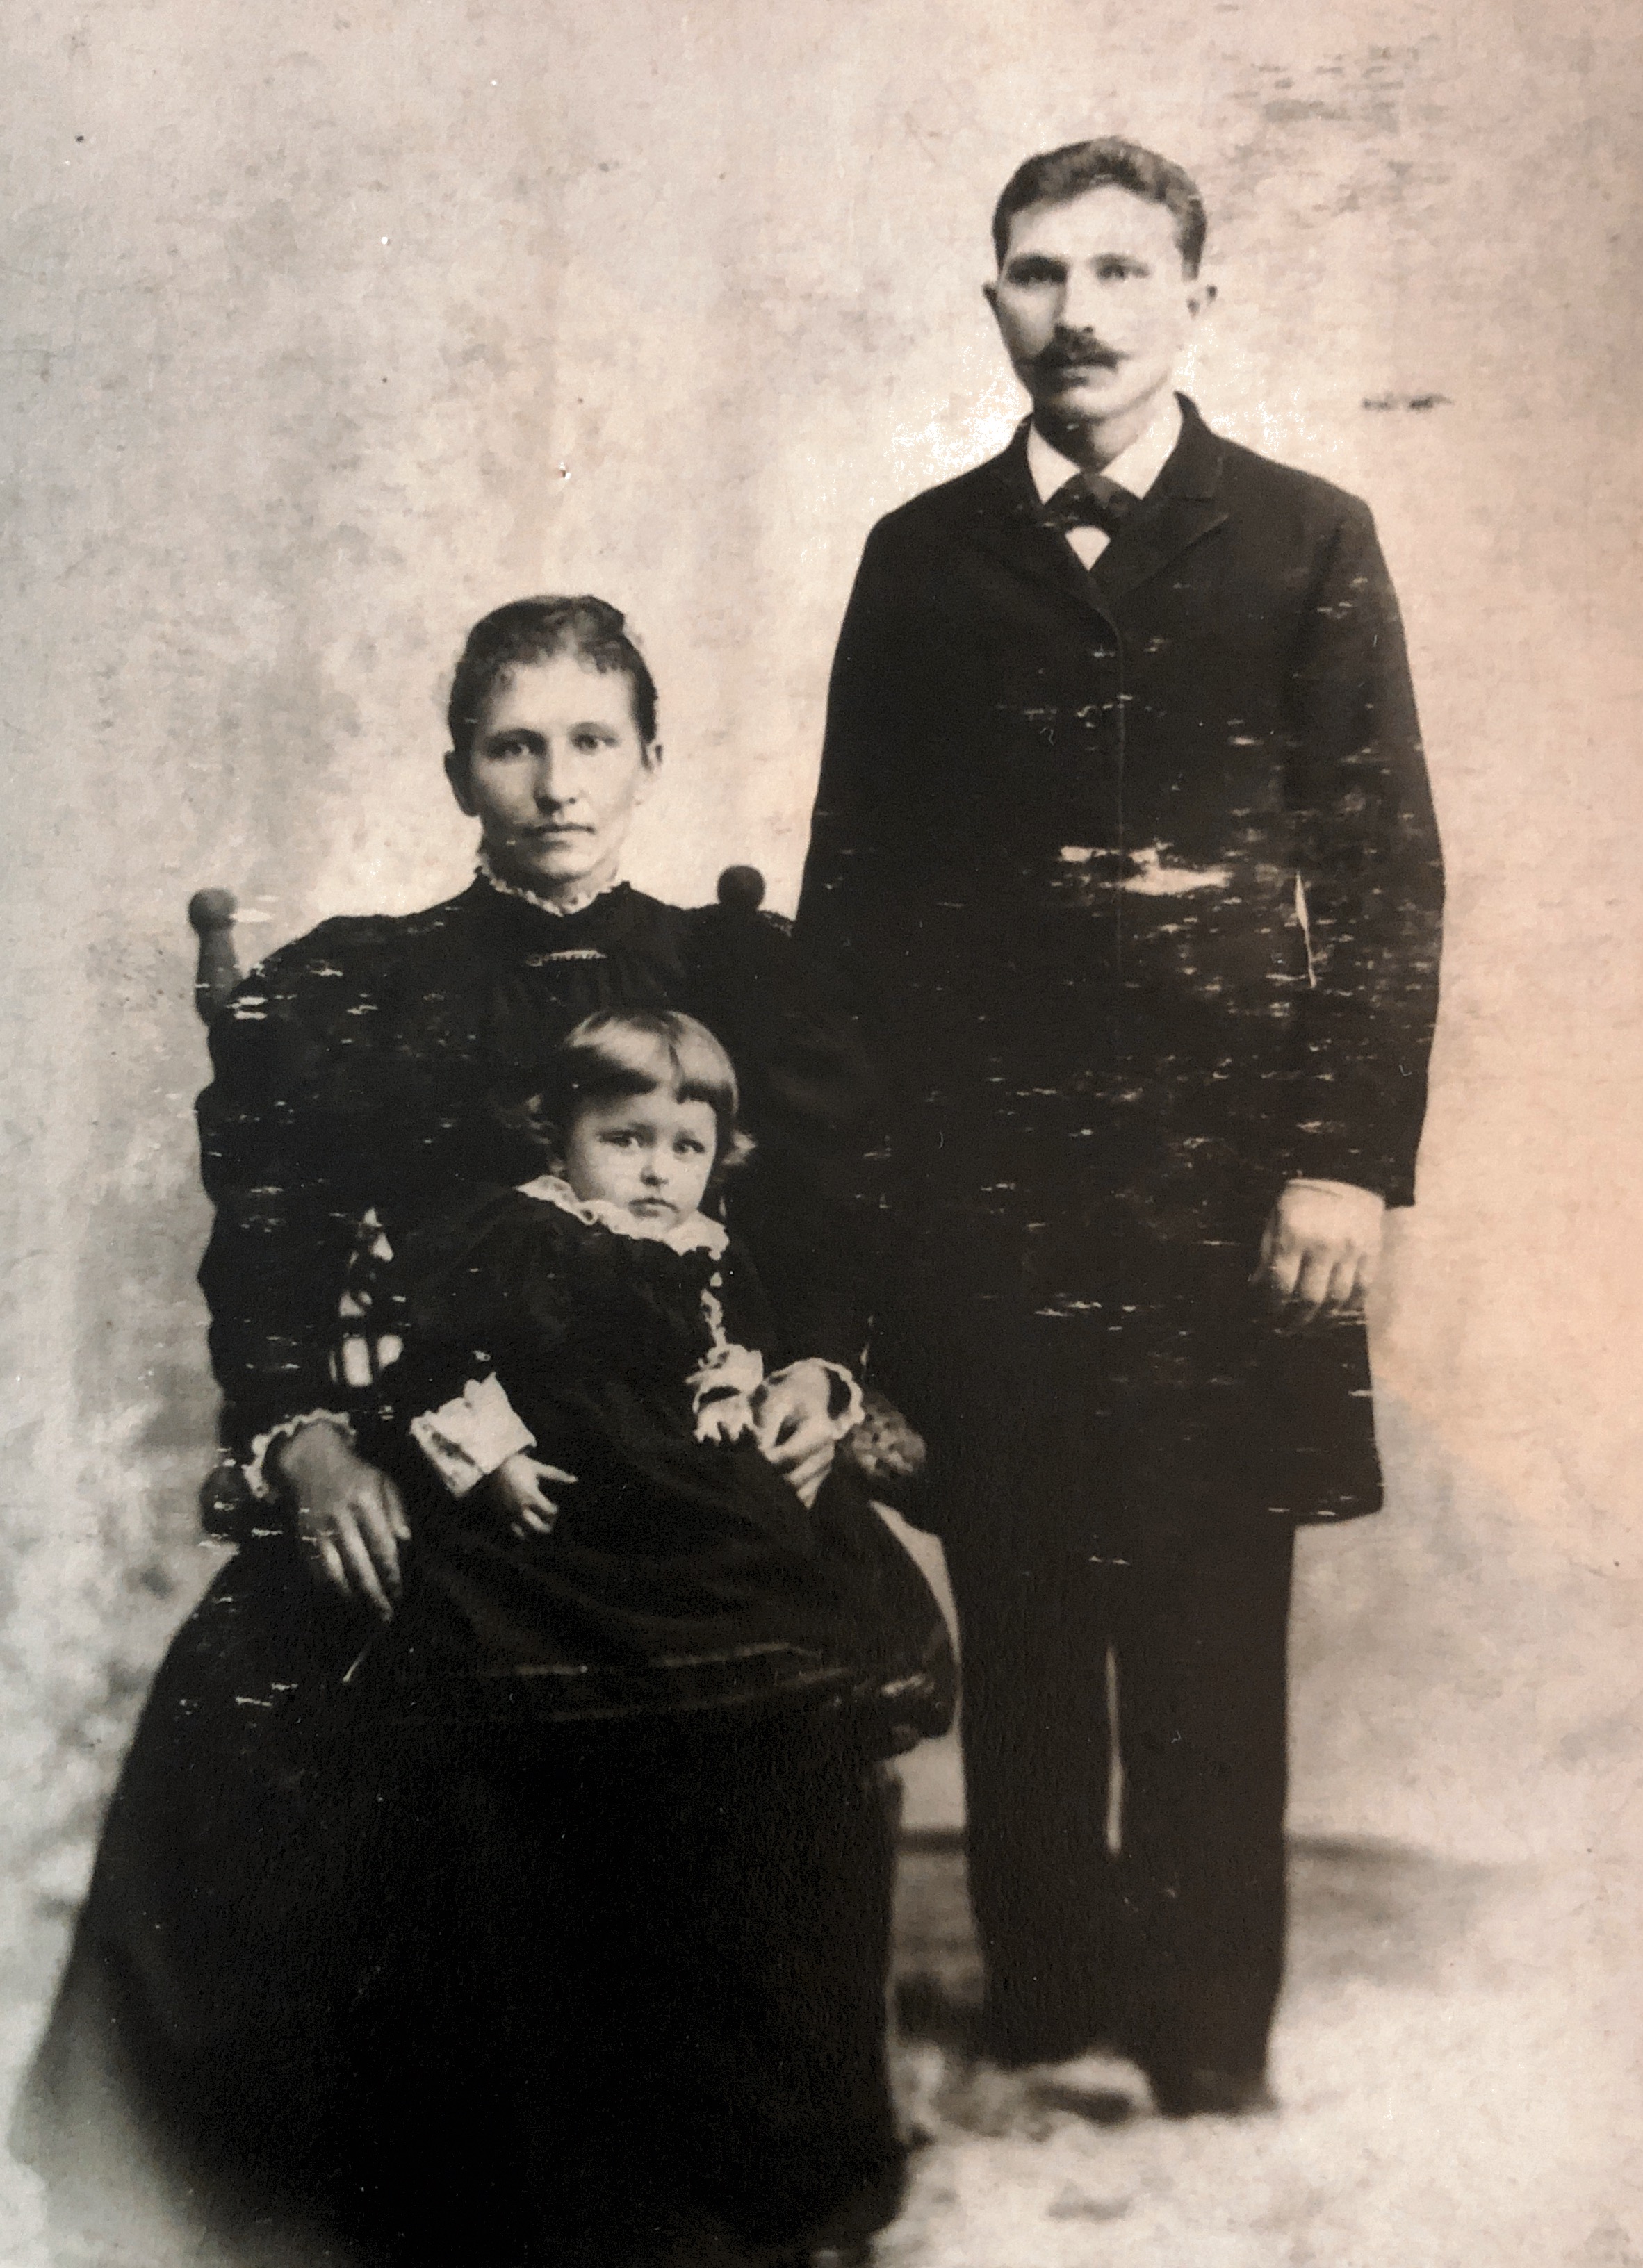 Vincent and Josephine Rudziewicz with Daughter Emily. Vincent and Josephine were Stanley Rud’s parents and Emily was their daughter who died at age 3 in 1895.